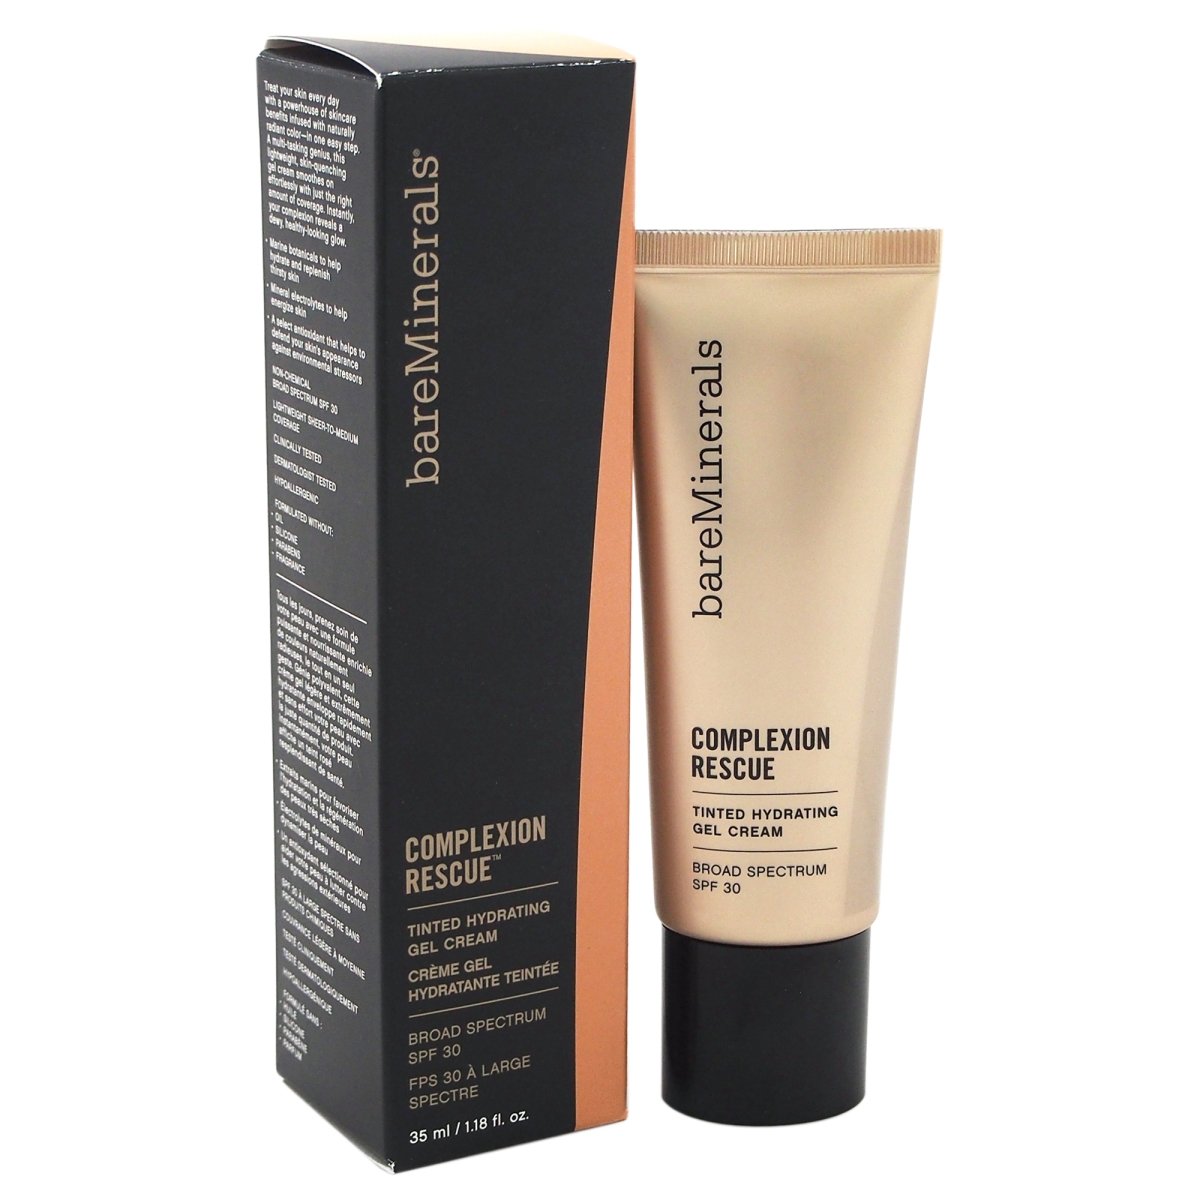 Picture of BareMinerals W-C-10645 1.18 oz Complexion Rescue Tinted Hydrating Gel Cream SPF 30 Foundation for Womens - Spice 08